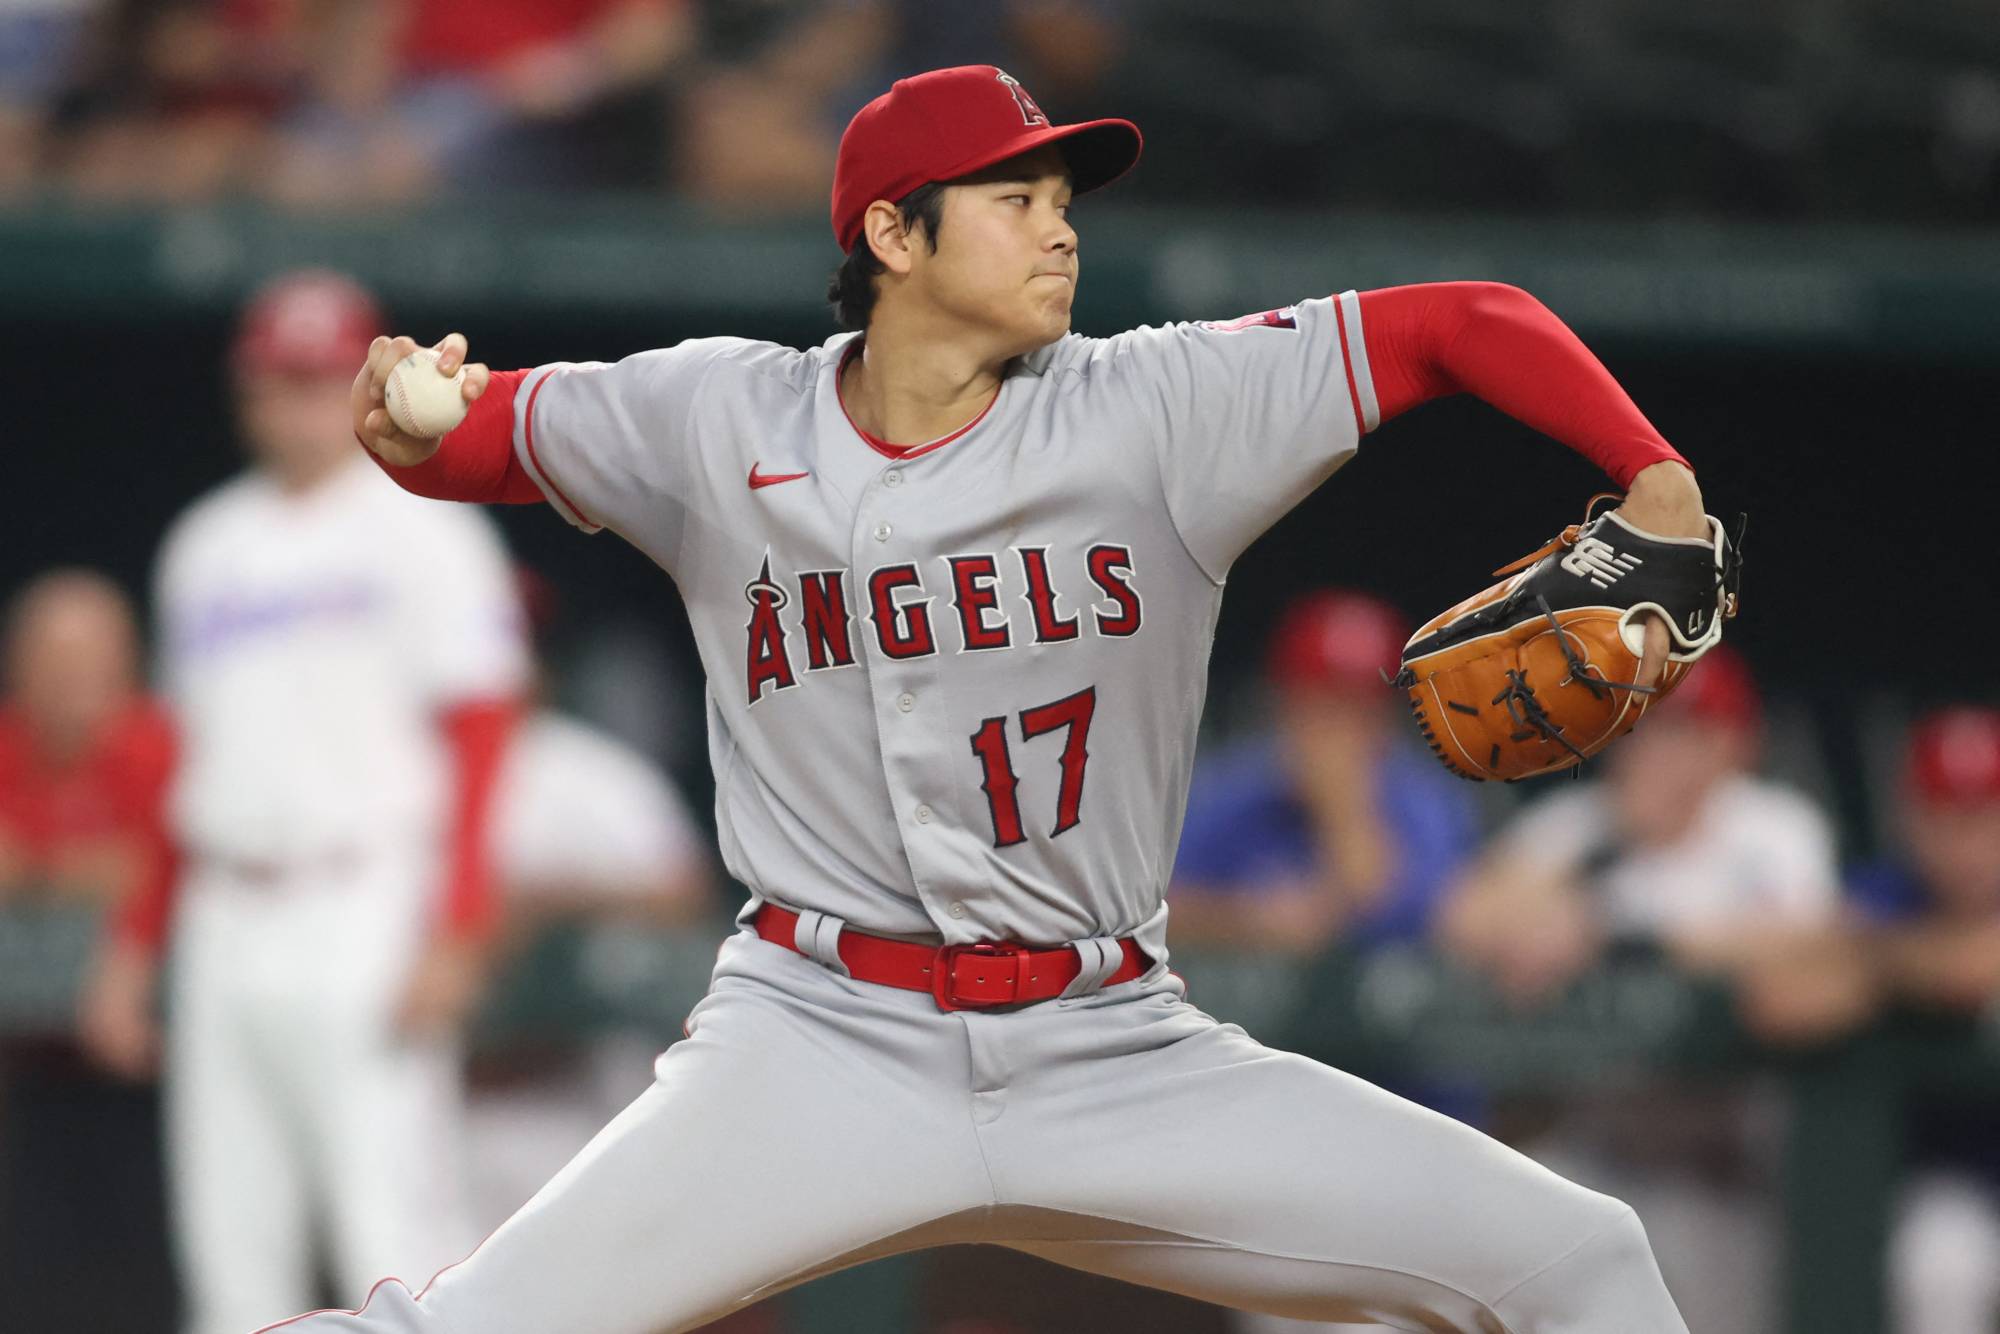 Shohei Ohtani will be starting pitcher for AL in All-Star game